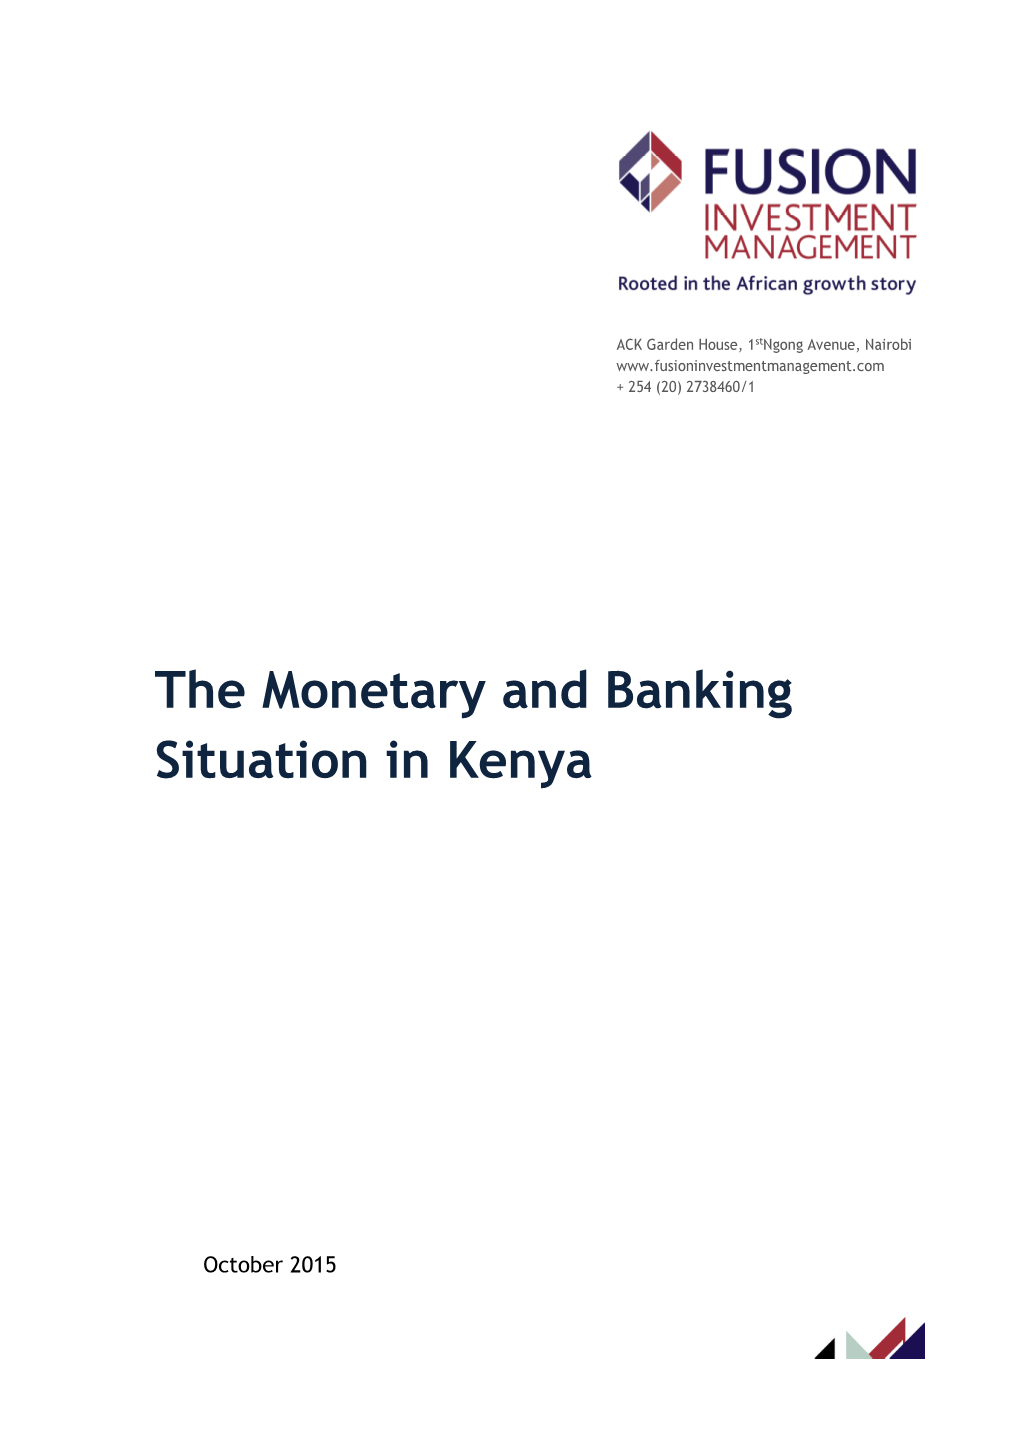 The Monetary and Banking Situation in Kenya